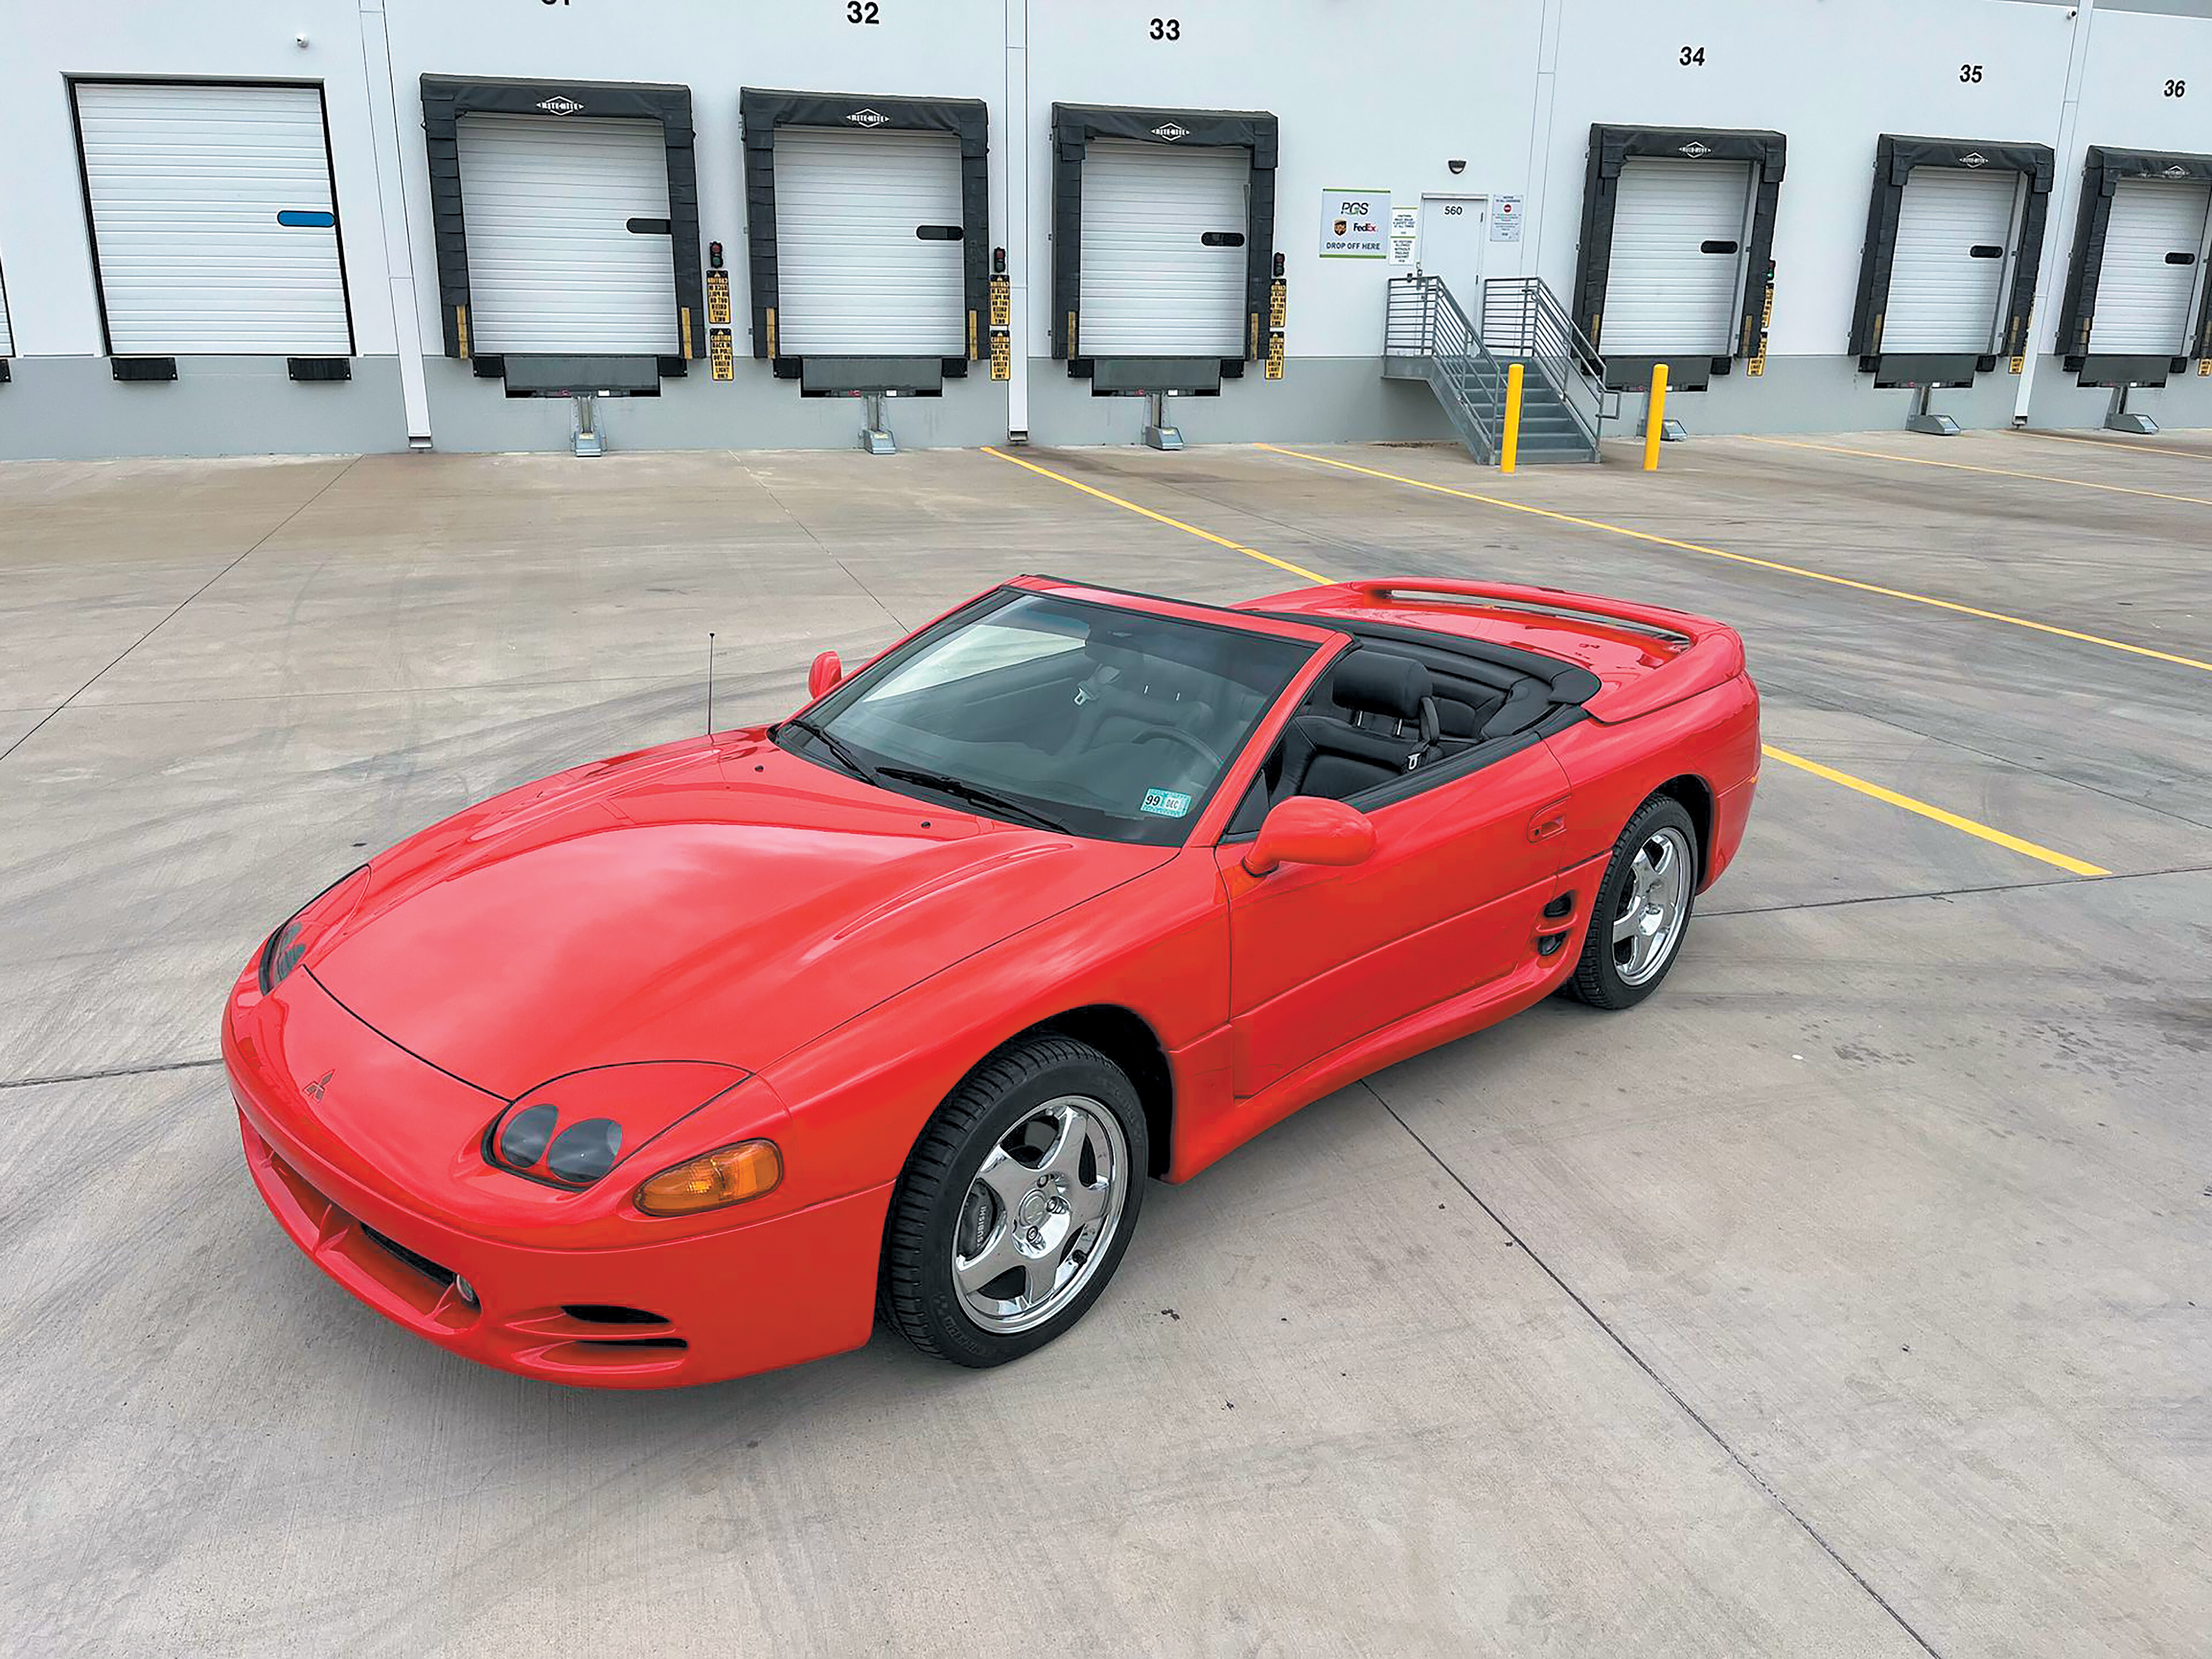 The 1995-'96 Mistubishi 3000GT Spyder Started The Folding Hardtop Convertible Trend